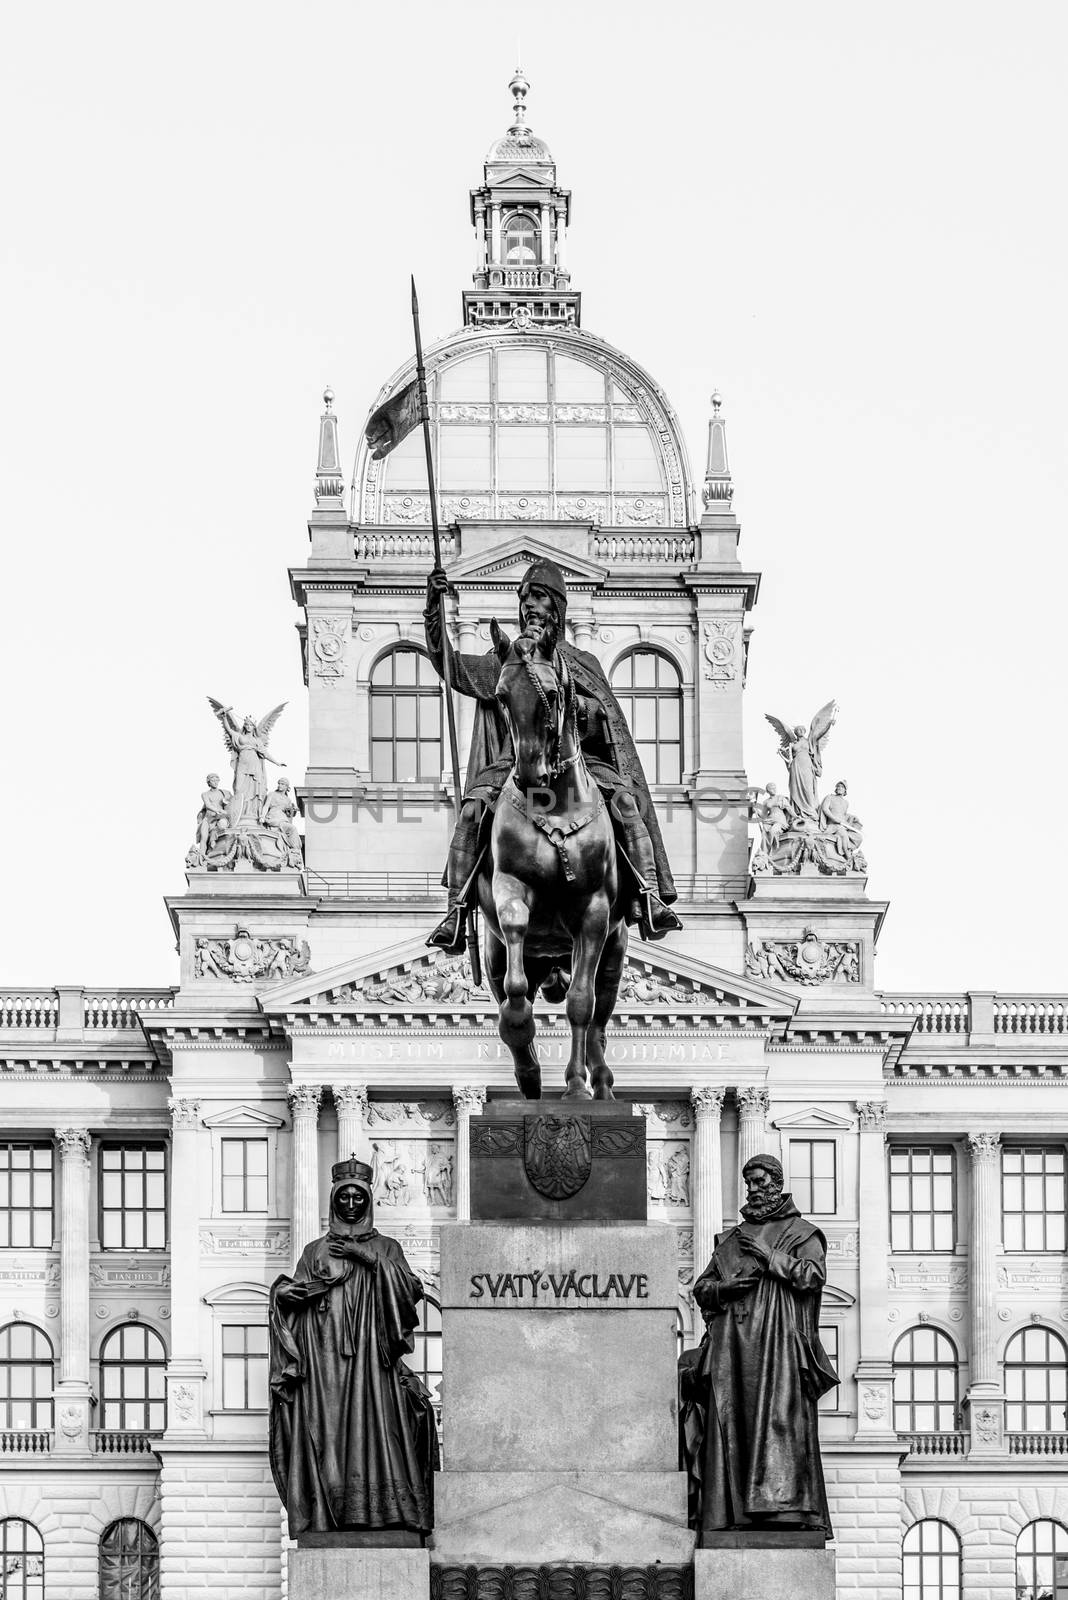 The bronze equestrian statue of St Wenceslas at the Wenceslas Square with historical Neorenaissance building of National Museum in Prague, Czech Republic by pyty